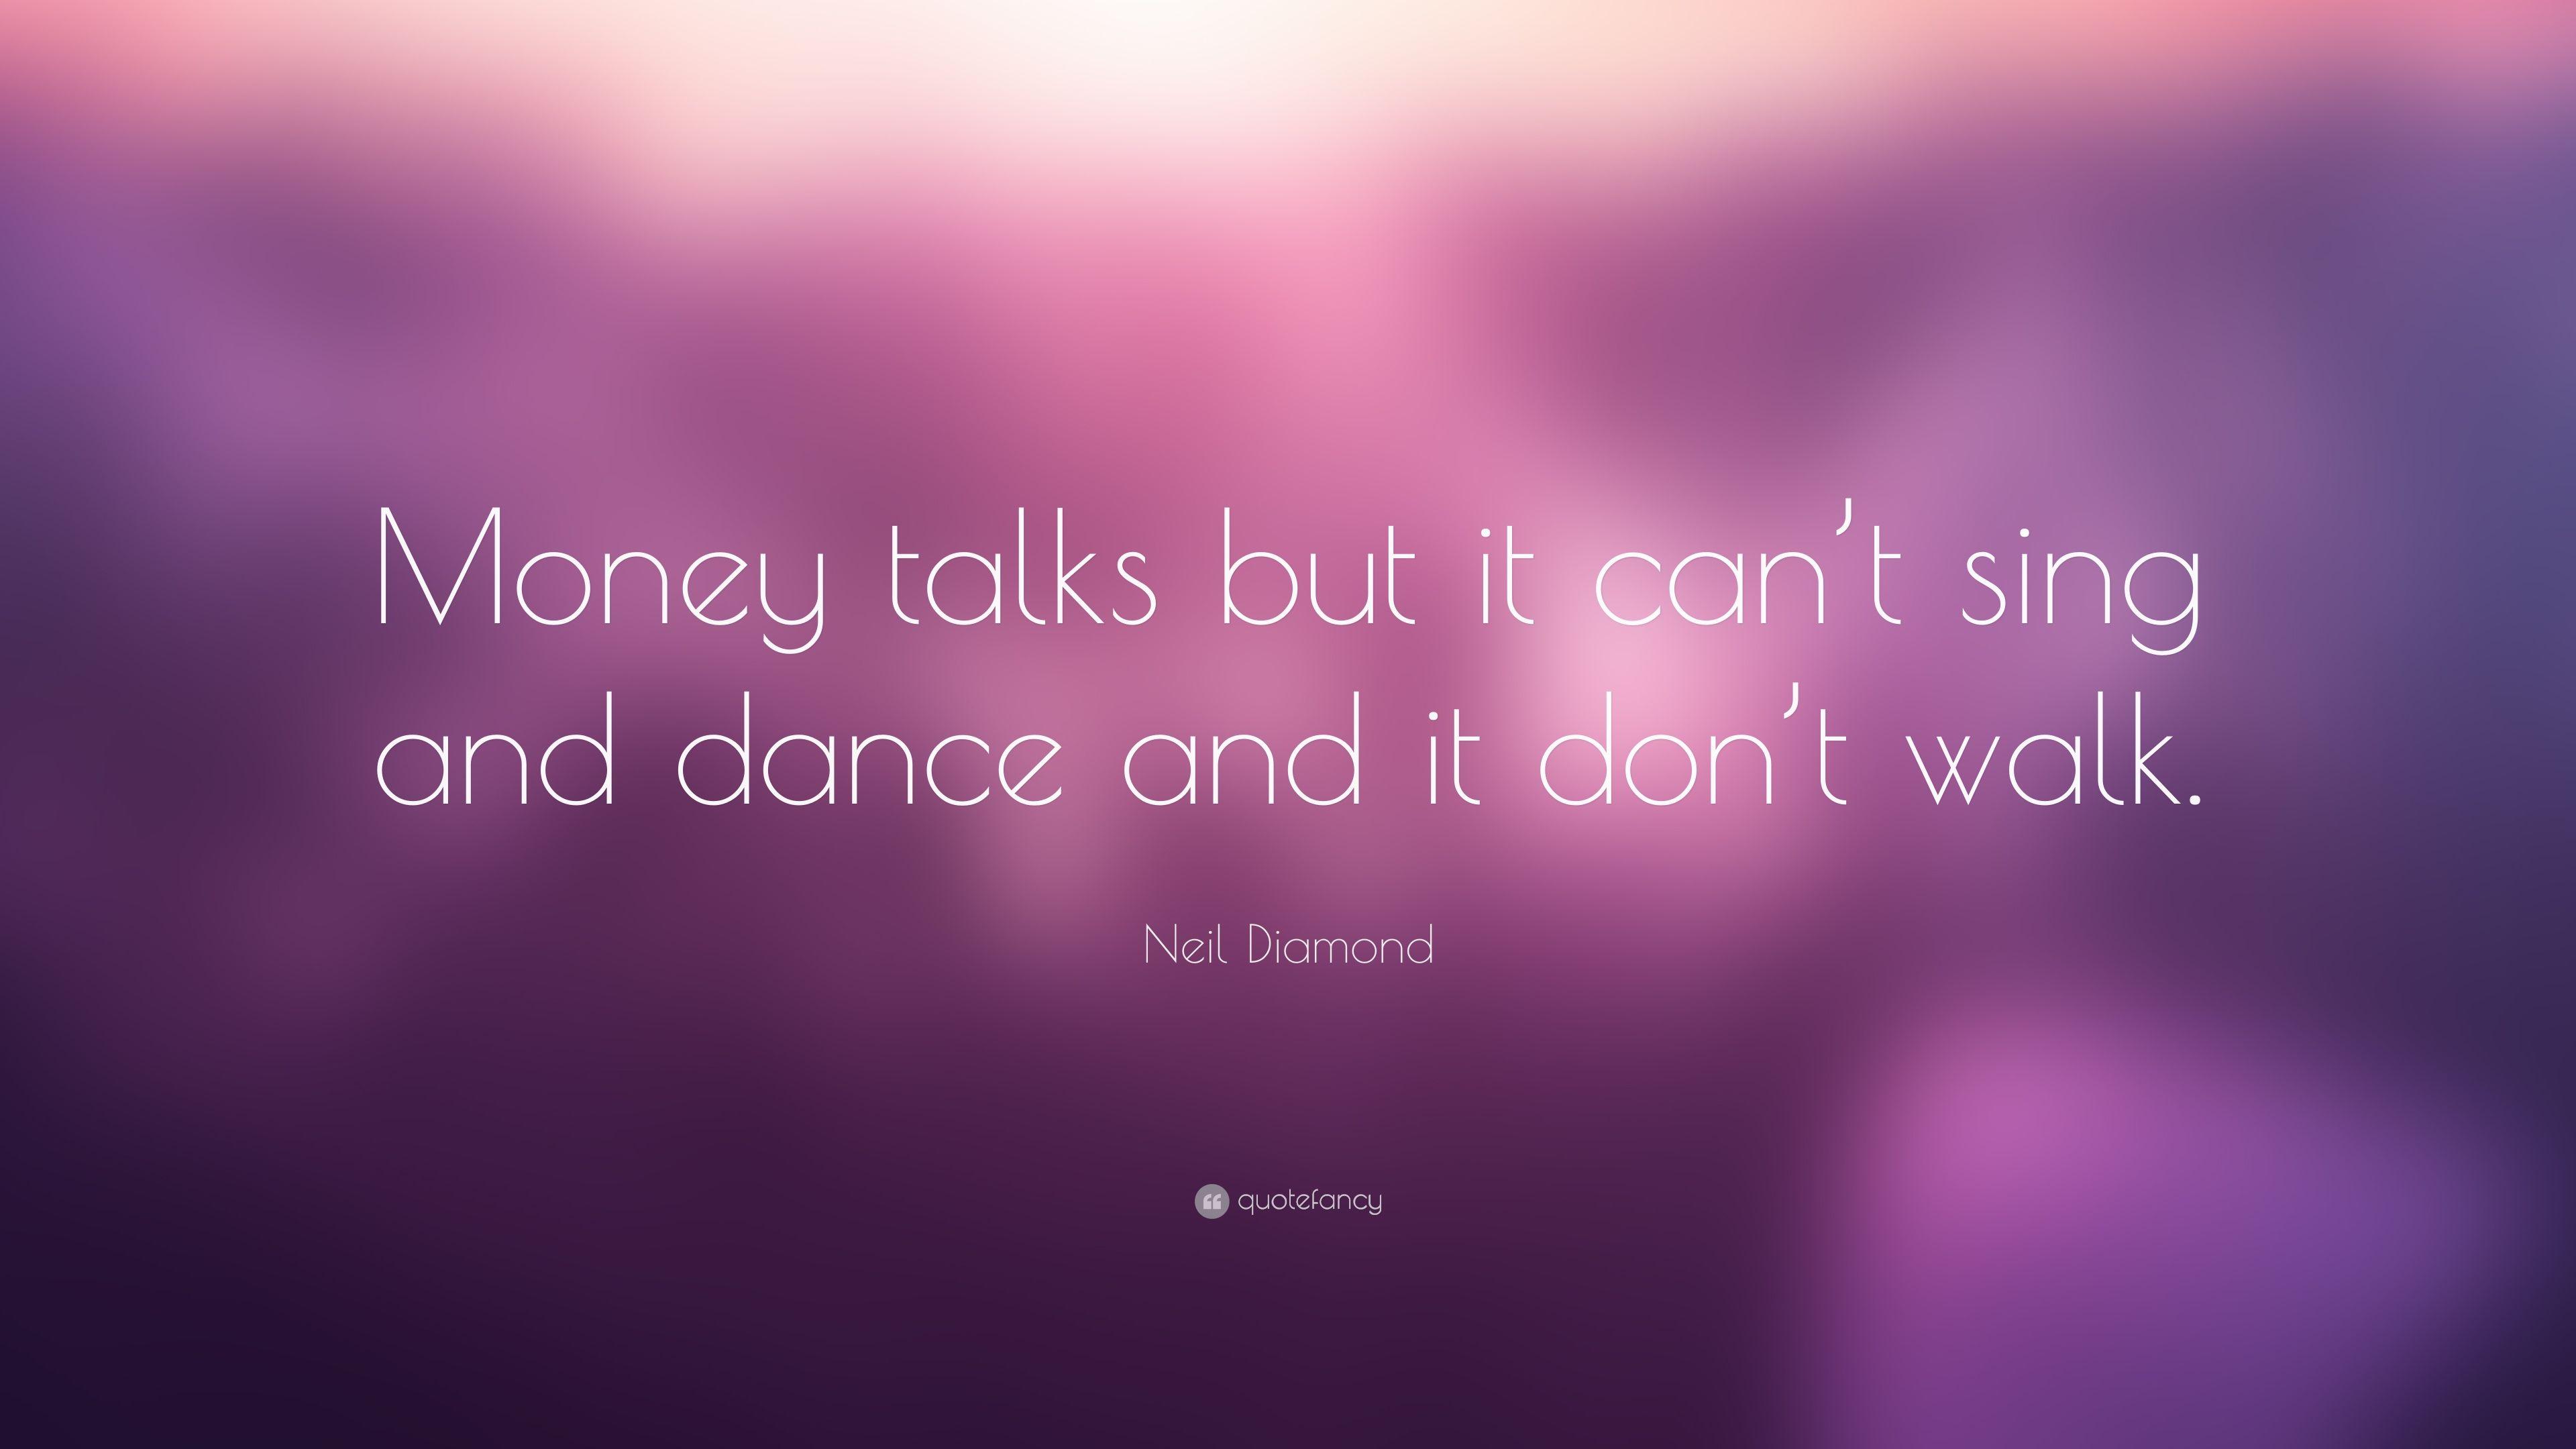 Neil Diamond Quote: “Money talks but it can't sing and dance